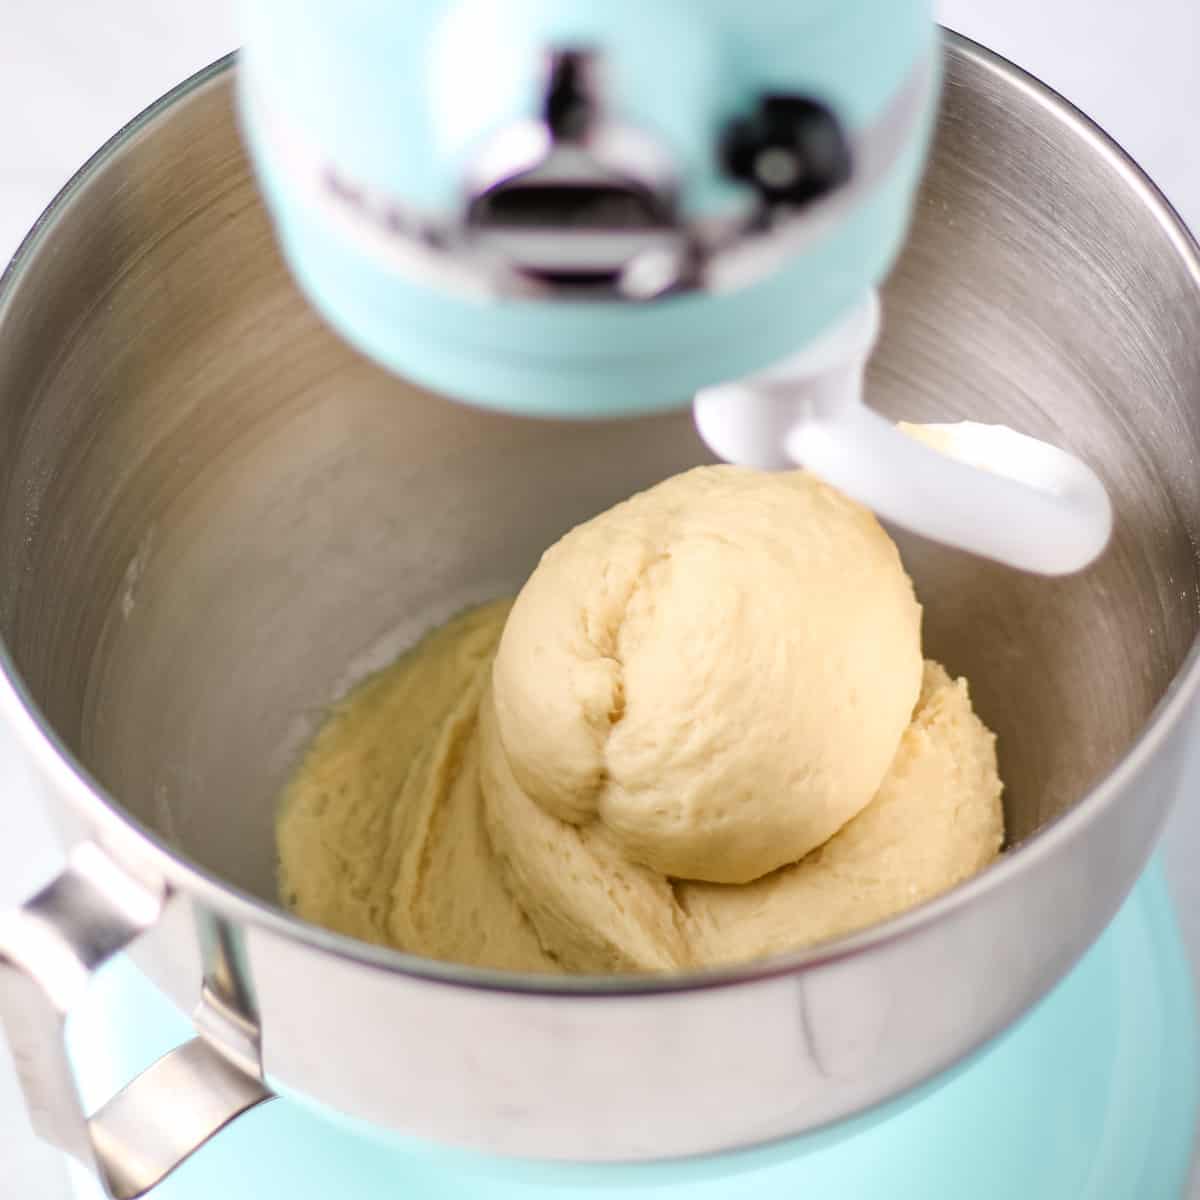 Cinnamon roll dough in the mixing bowl of a blue stand mixer.